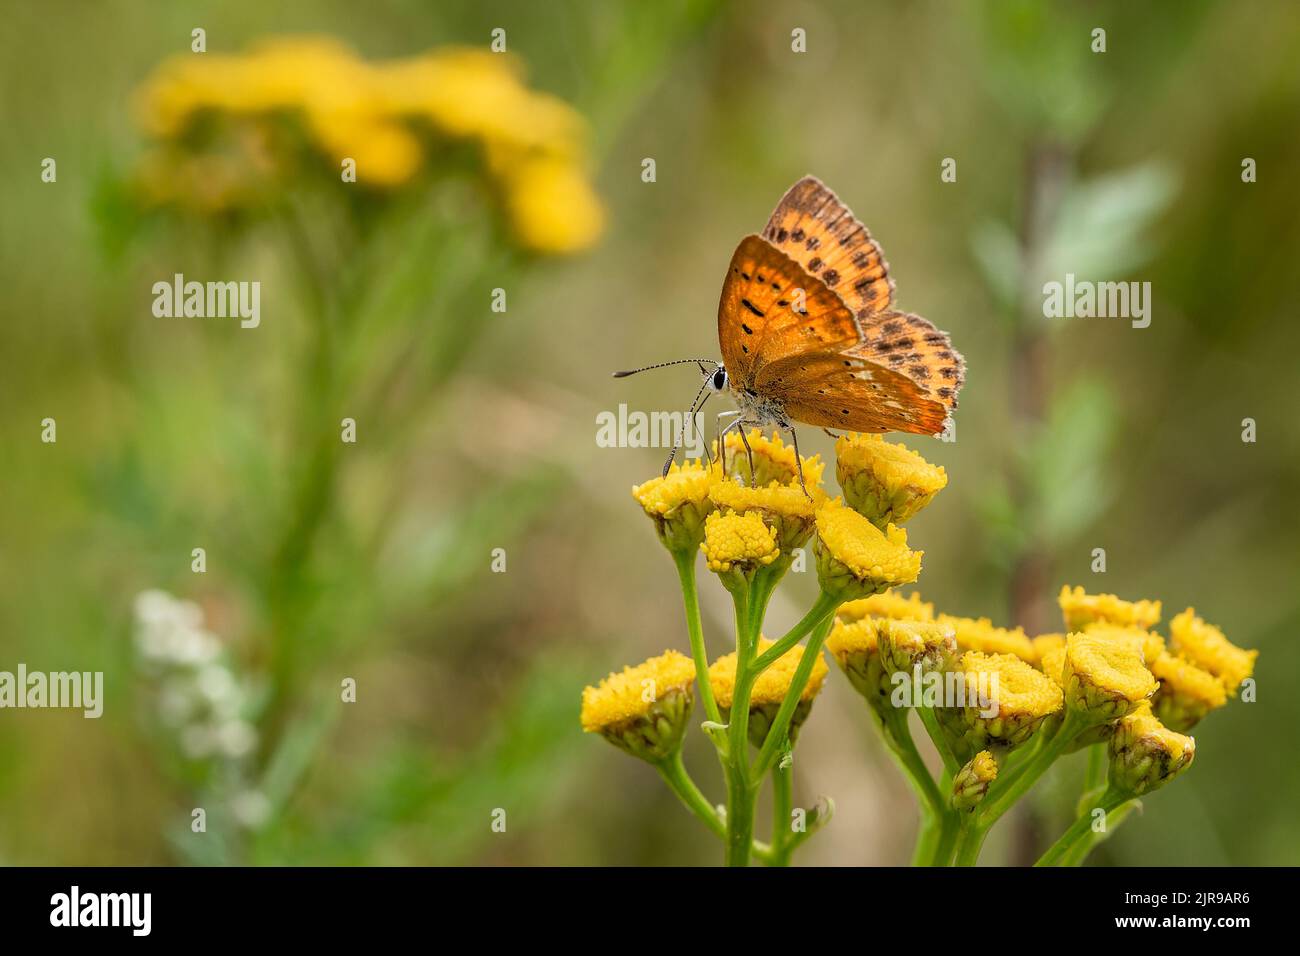 The scarce copper, an orange and brown female butterfly, sitting on a wild yellow tansy flower growing in a forest. Blurry green background. Stock Photo